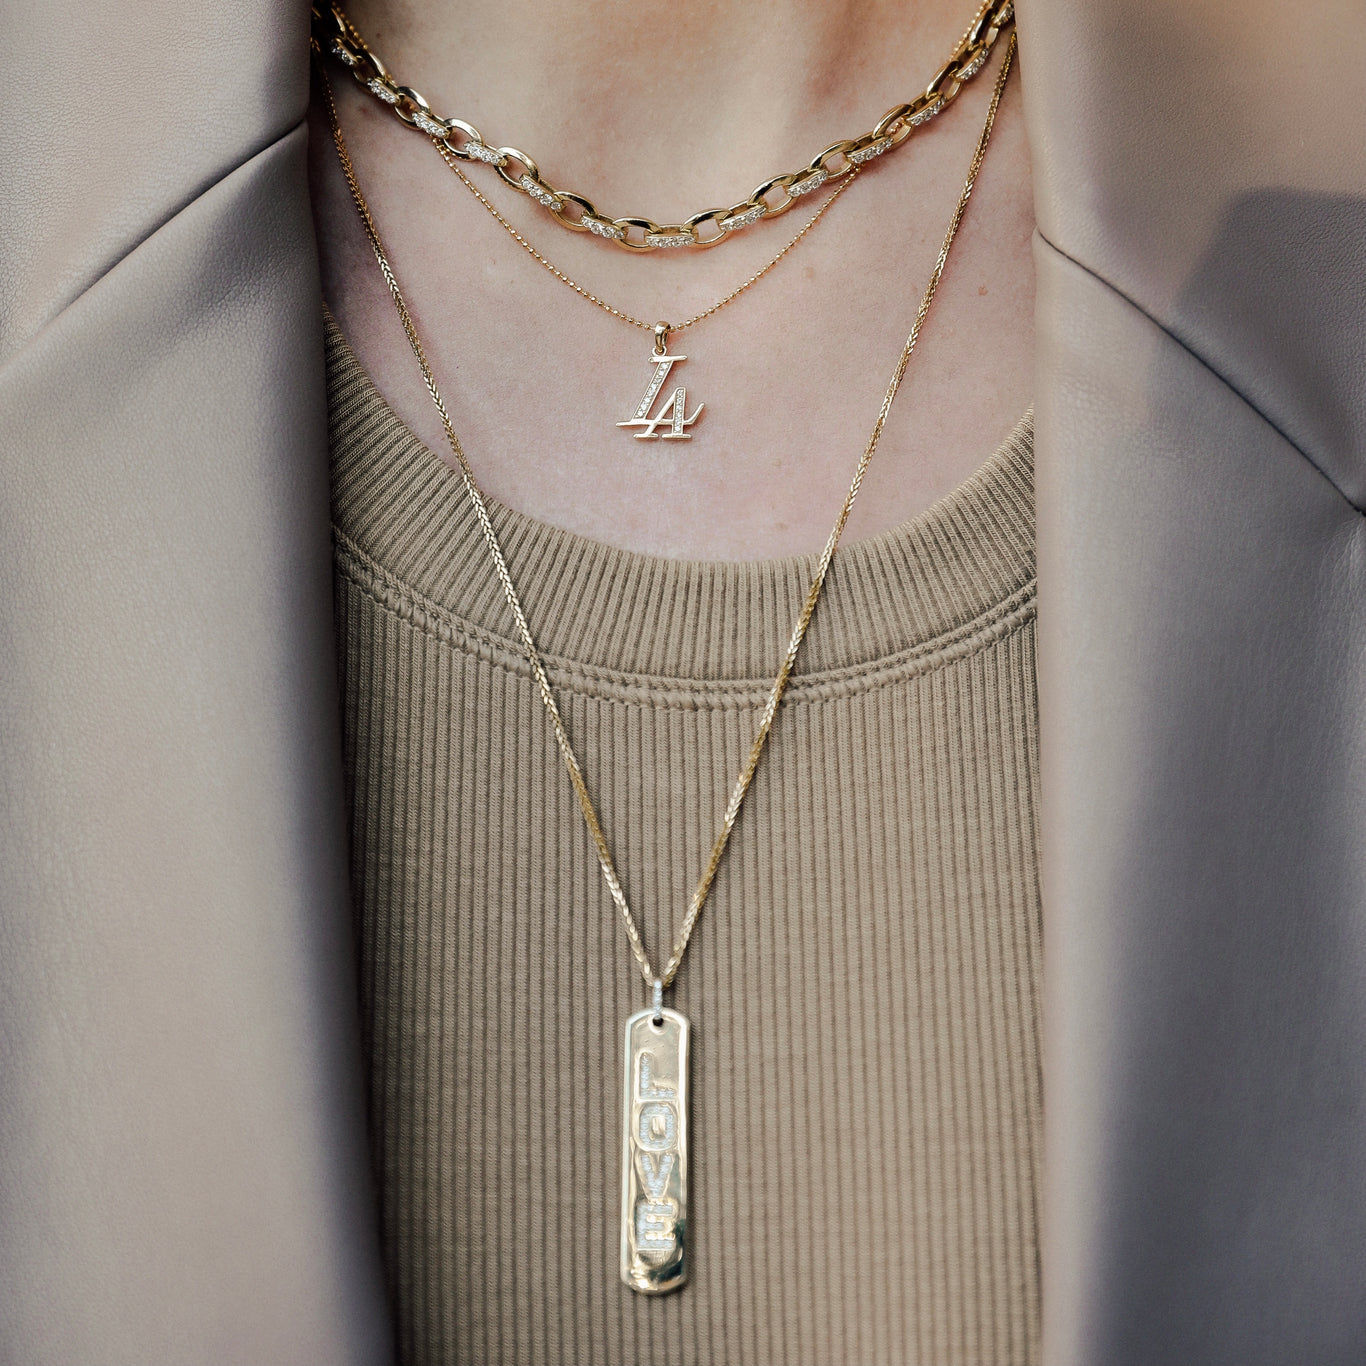 Longtag Necklace shown in Yellow Gold